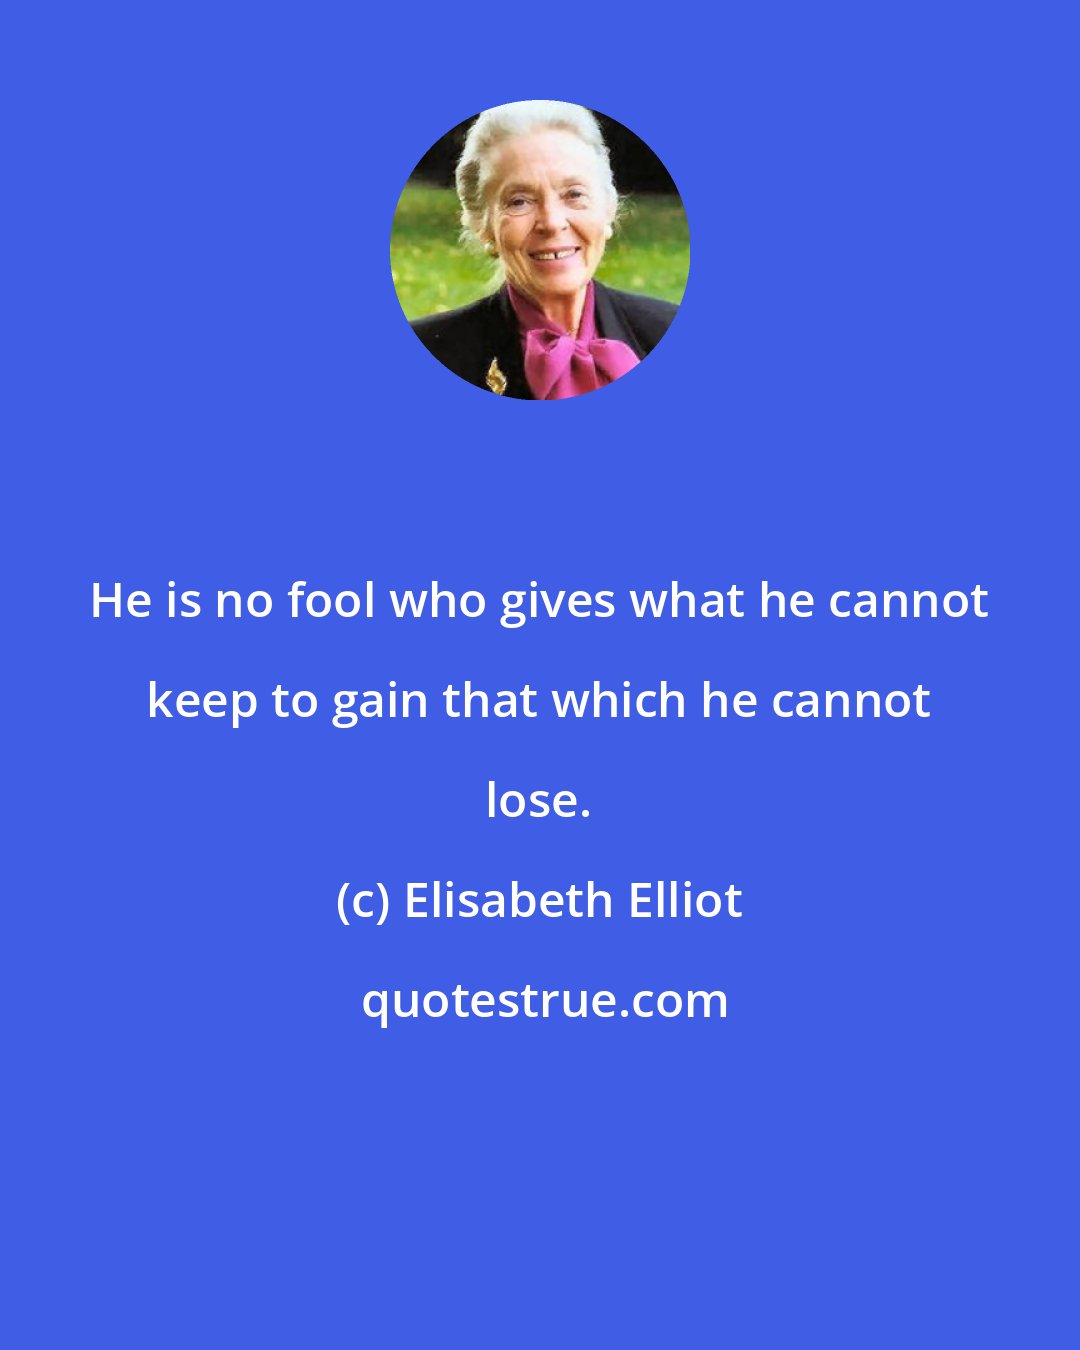 Elisabeth Elliot: He is no fool who gives what he cannot keep to gain that which he cannot lose.